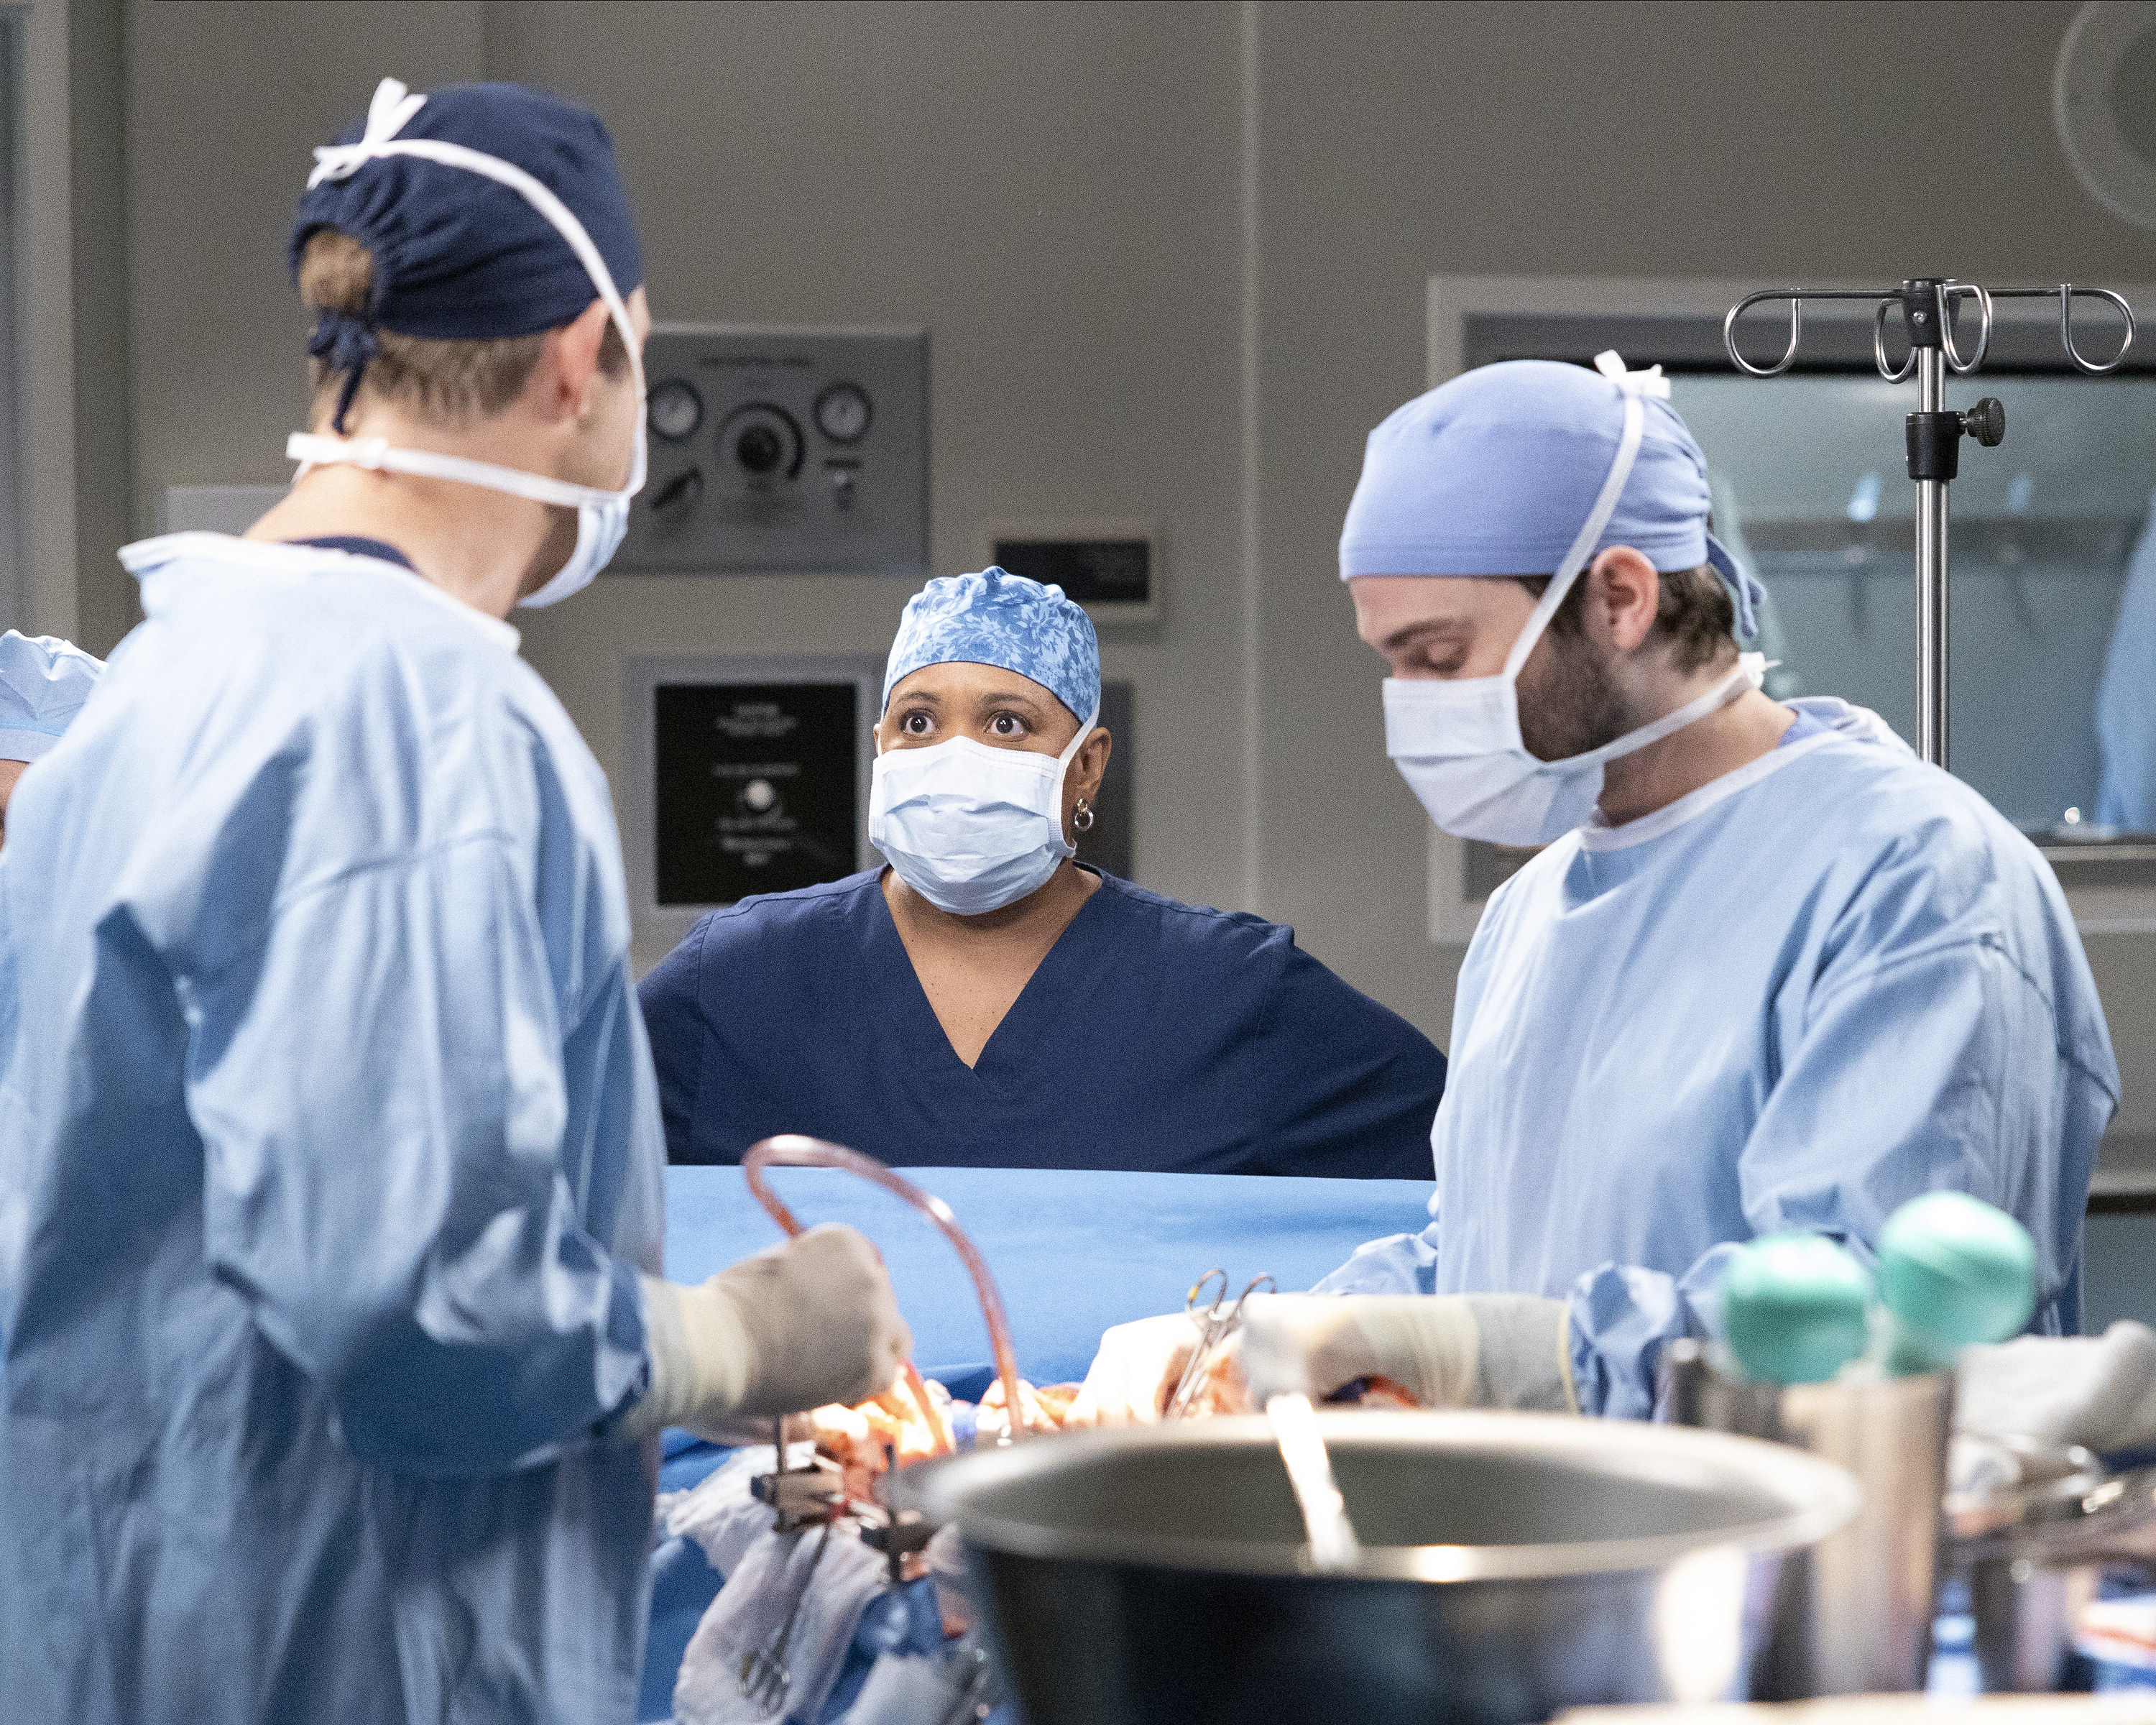 Bailey stands in the operating theatre wearing a mask and a scrub hat, while two men operate on a body